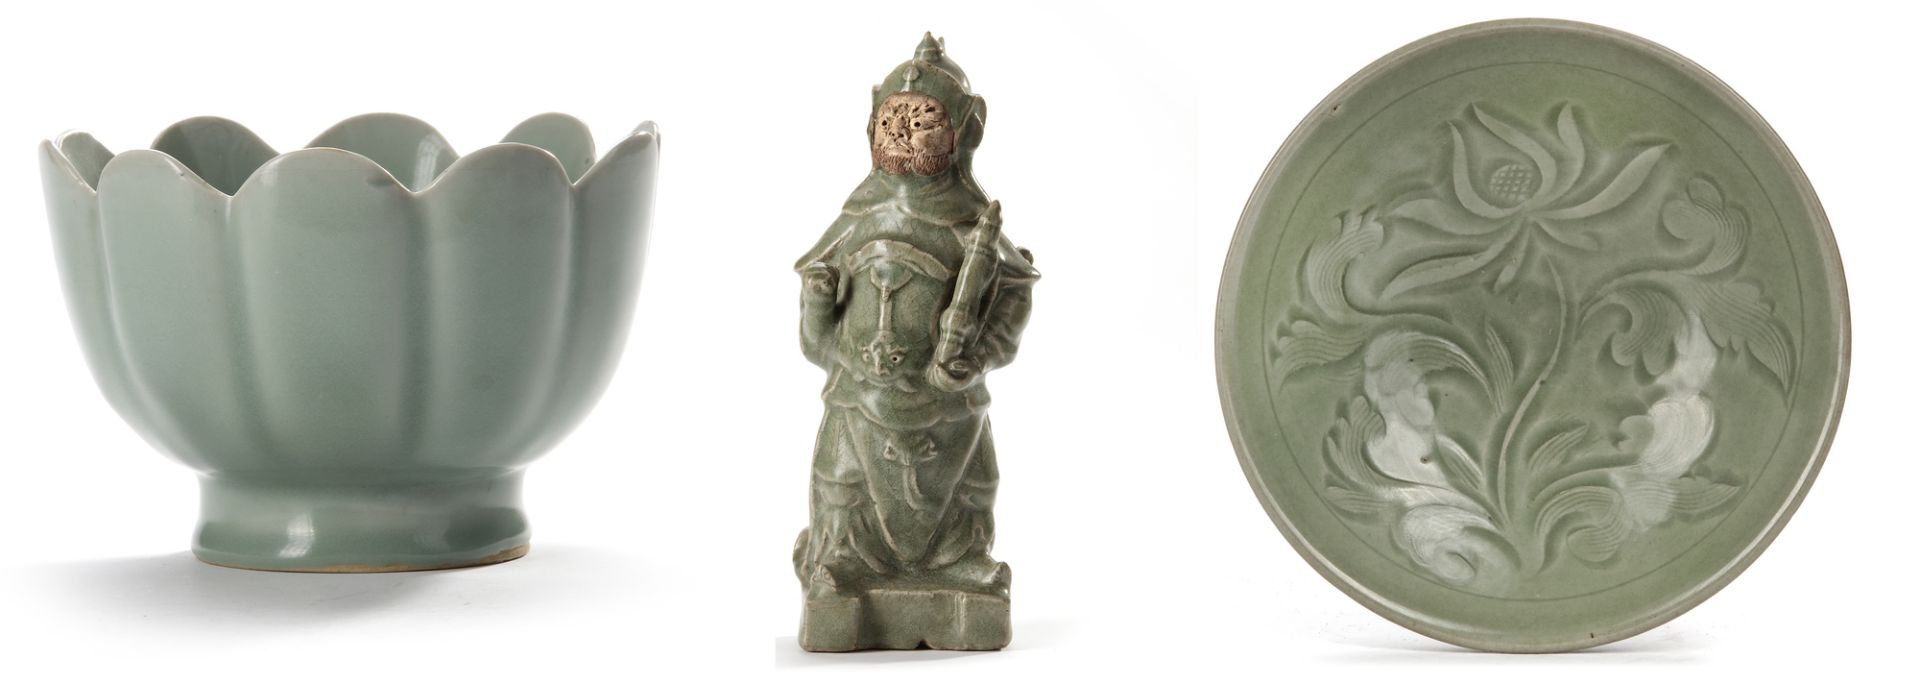 THREE CHINESE CELADON WARES, SONG DYNASTY (960-1127 AD) AND LATER - Image 2 of 6